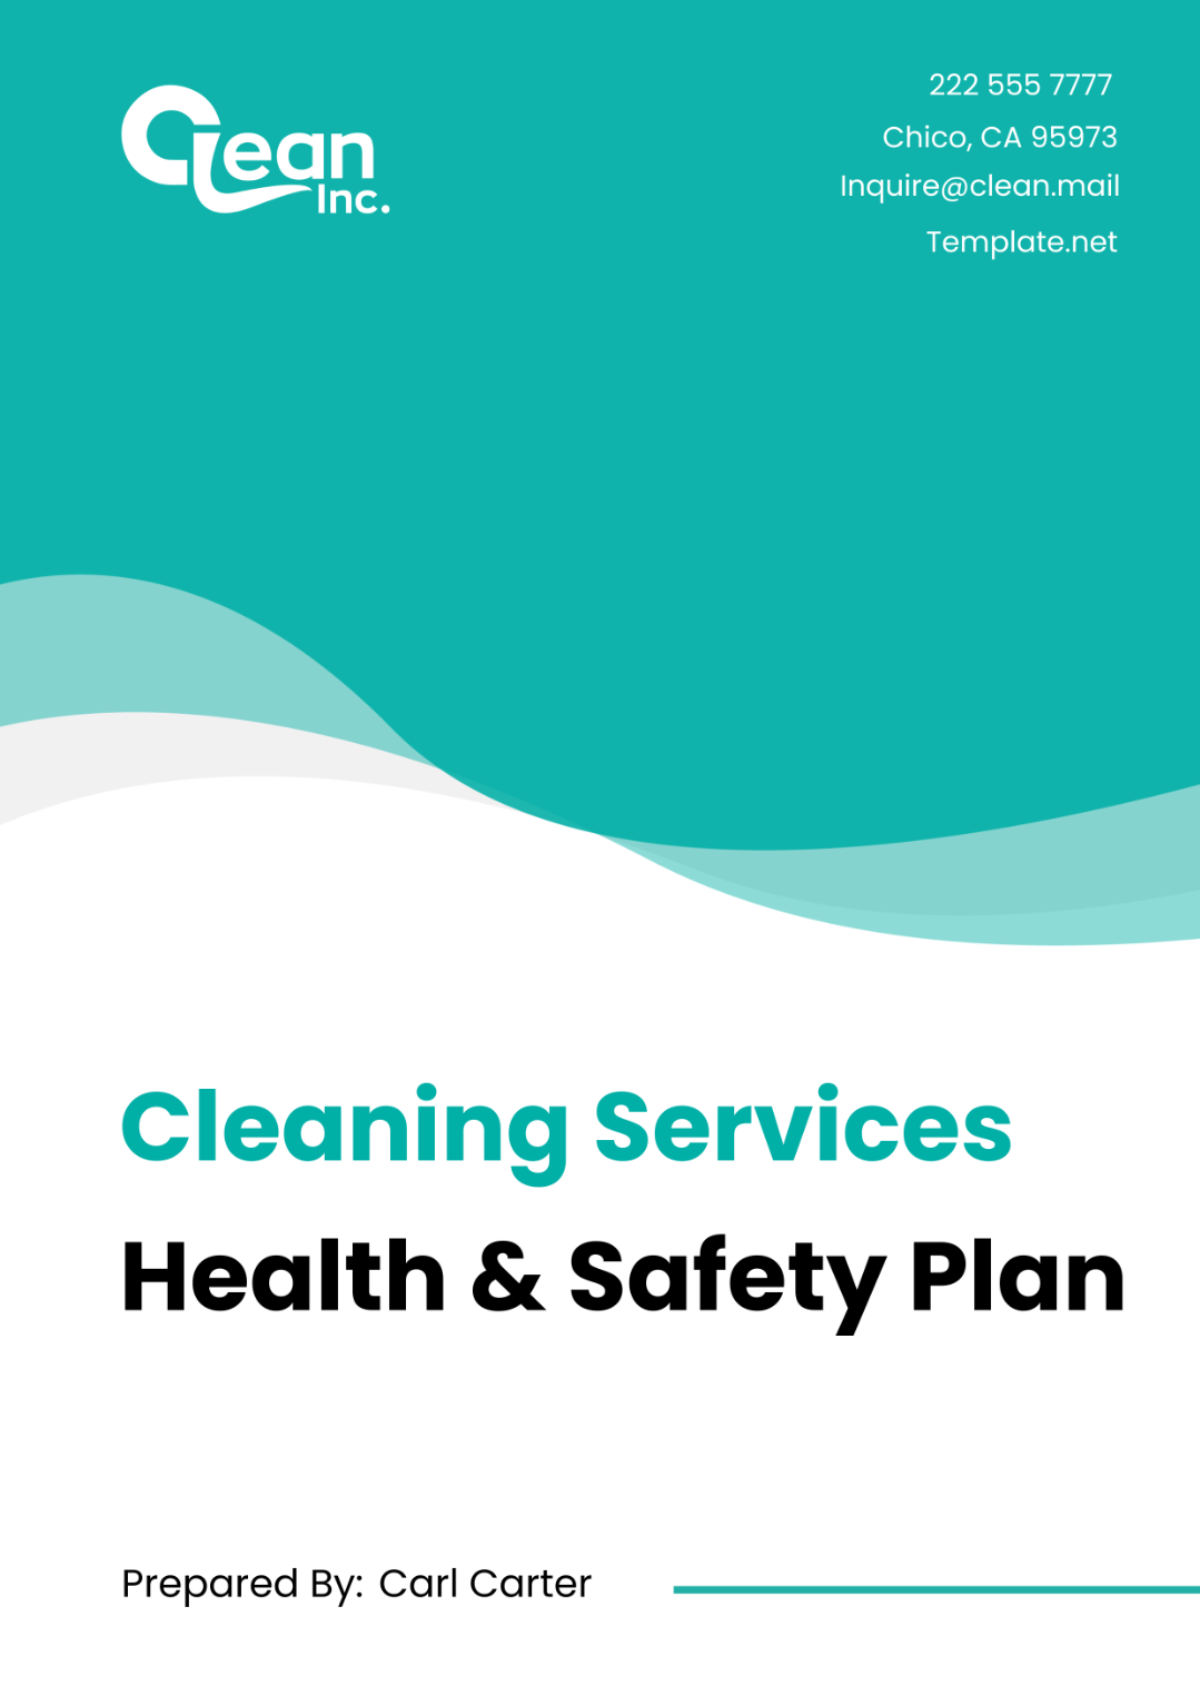 Free Cleaning Services Health & Safety Plan Template